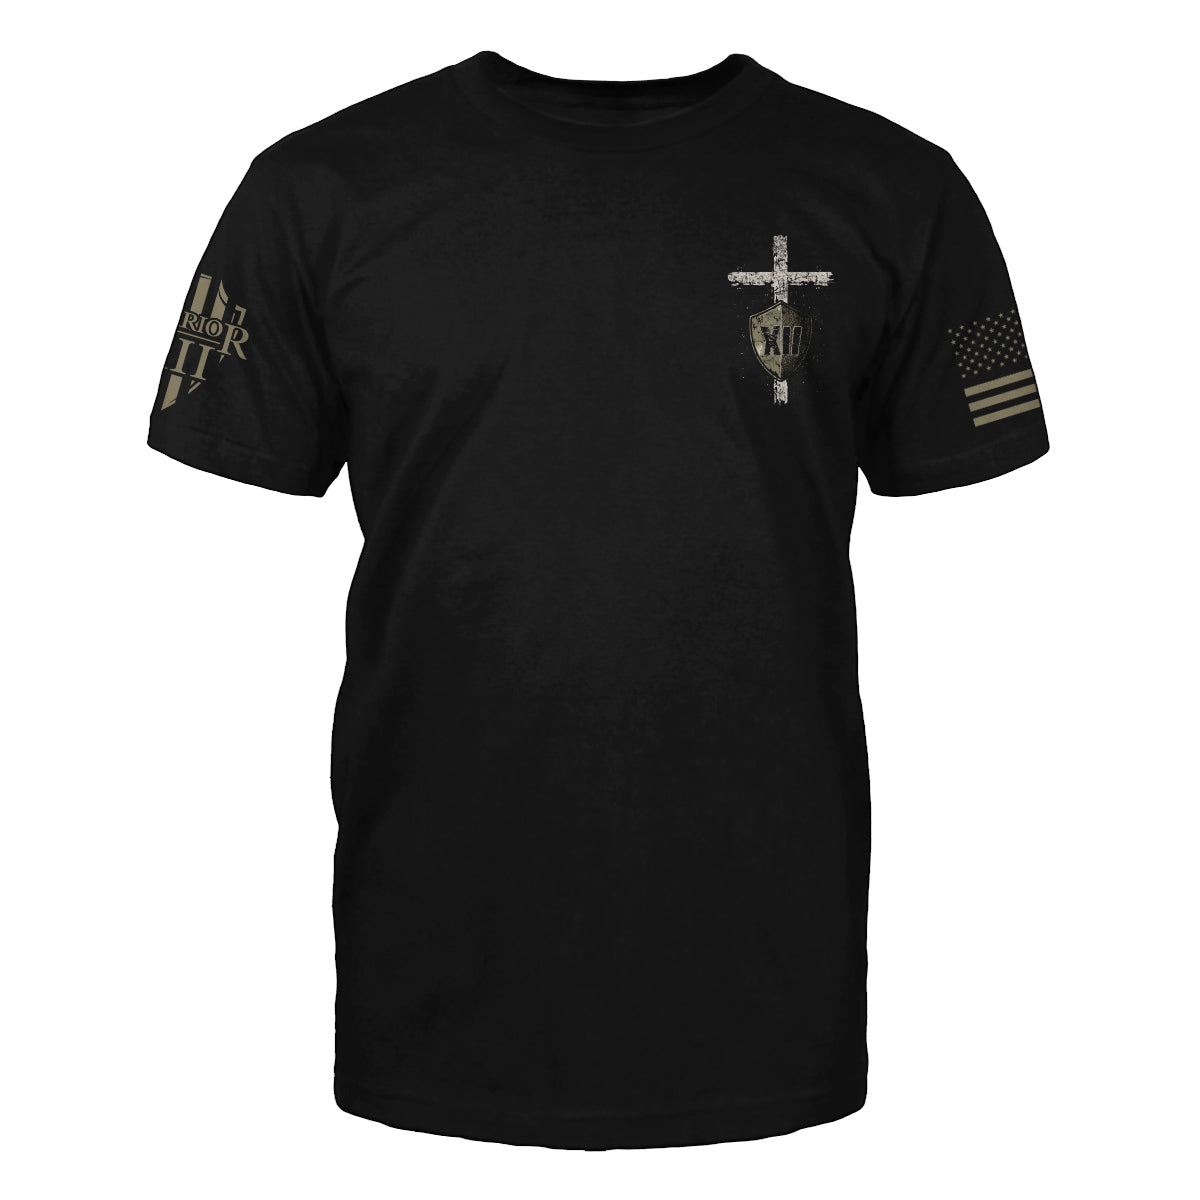 The front of "The Lord Is My Strength" featuring small chest print of Cross and a shield on the upper left side.